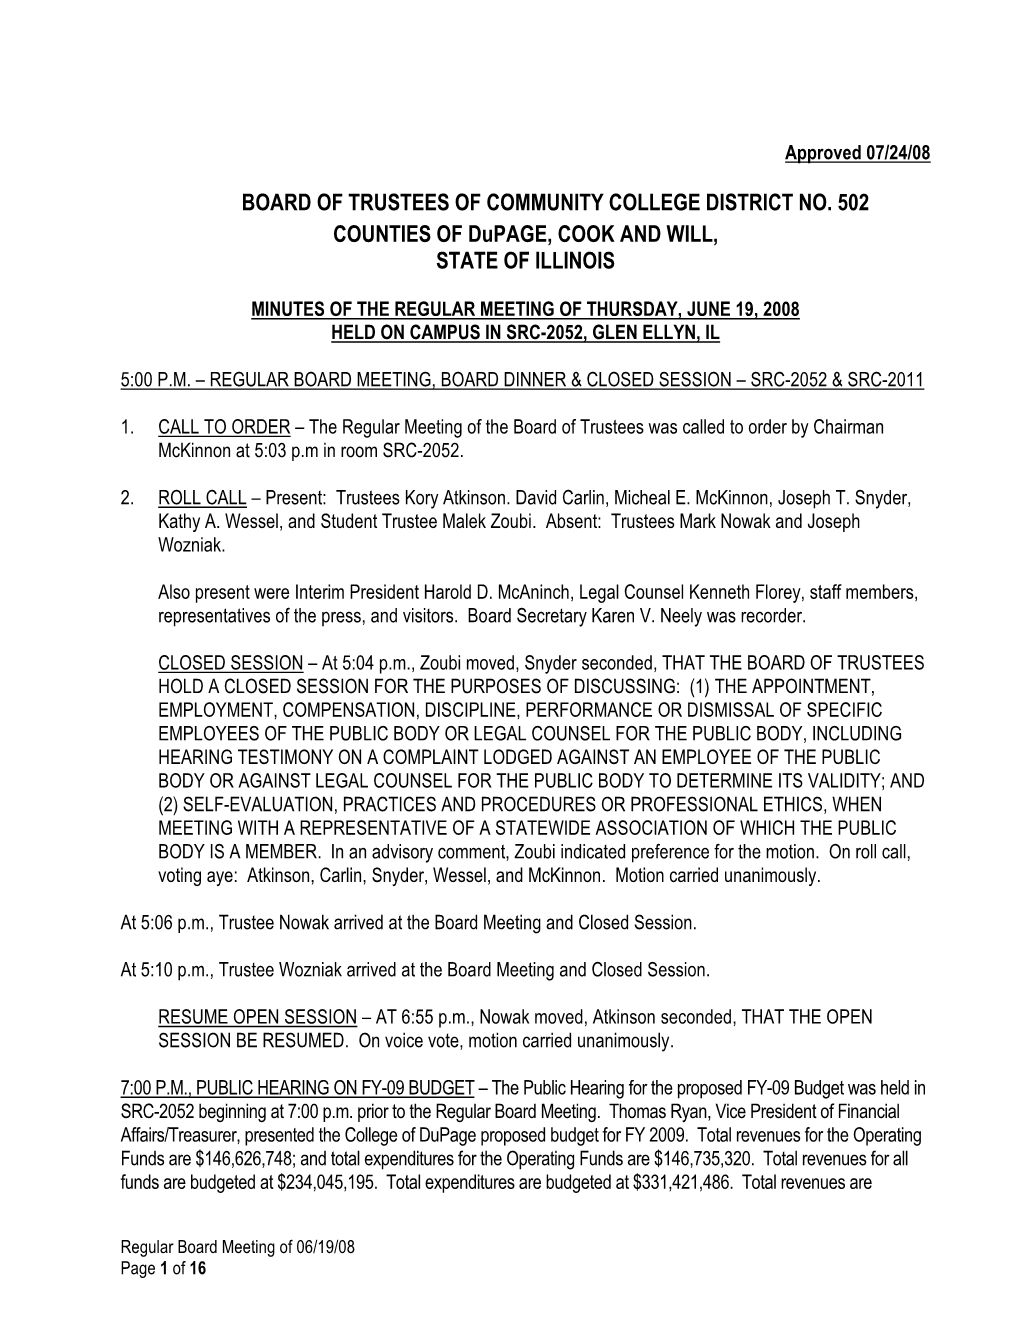 Board of Trustees of Community College District No